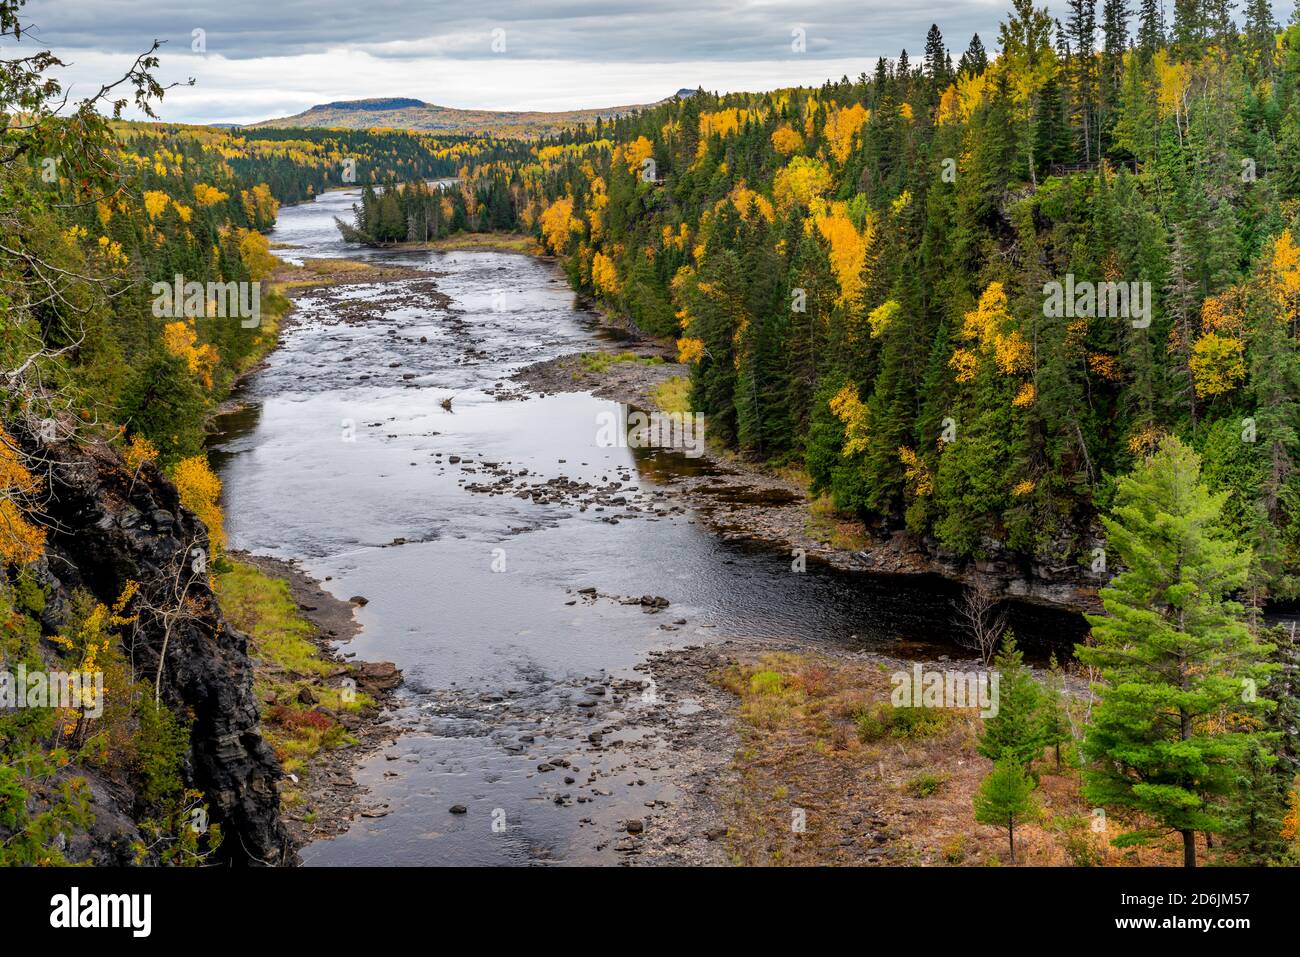 The gorge of the Kaministiquia River just downstream from the Kakabeka Falls with fall foliage color near Thunder Bay, Ontario, Canada. Stock Photo